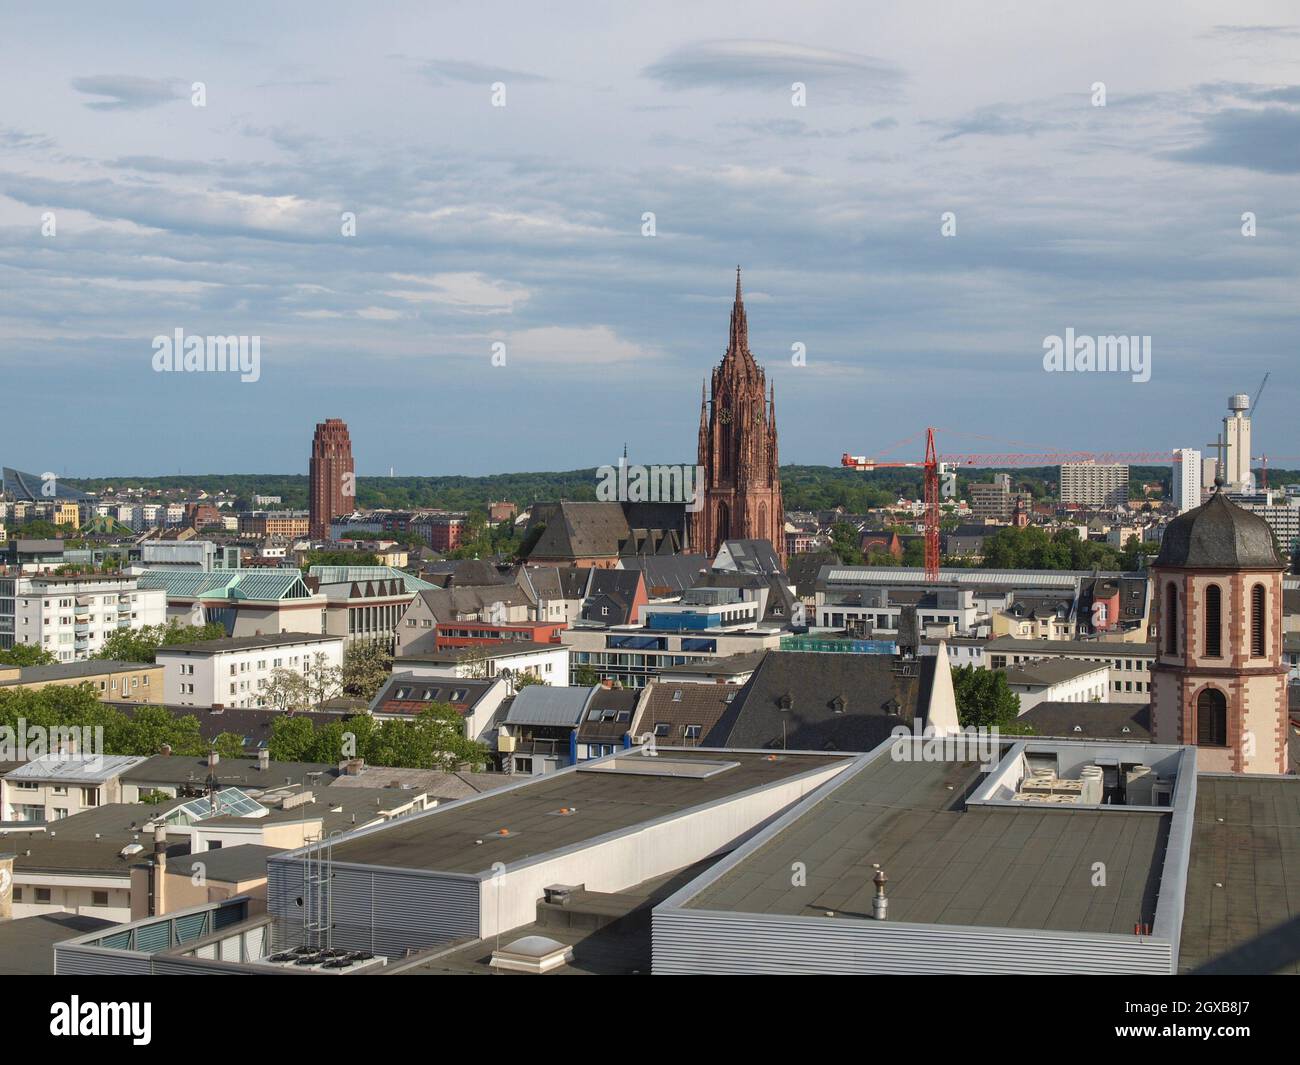 Aerial view of the city of Frankfurt am Main in Germany. Stock Photo